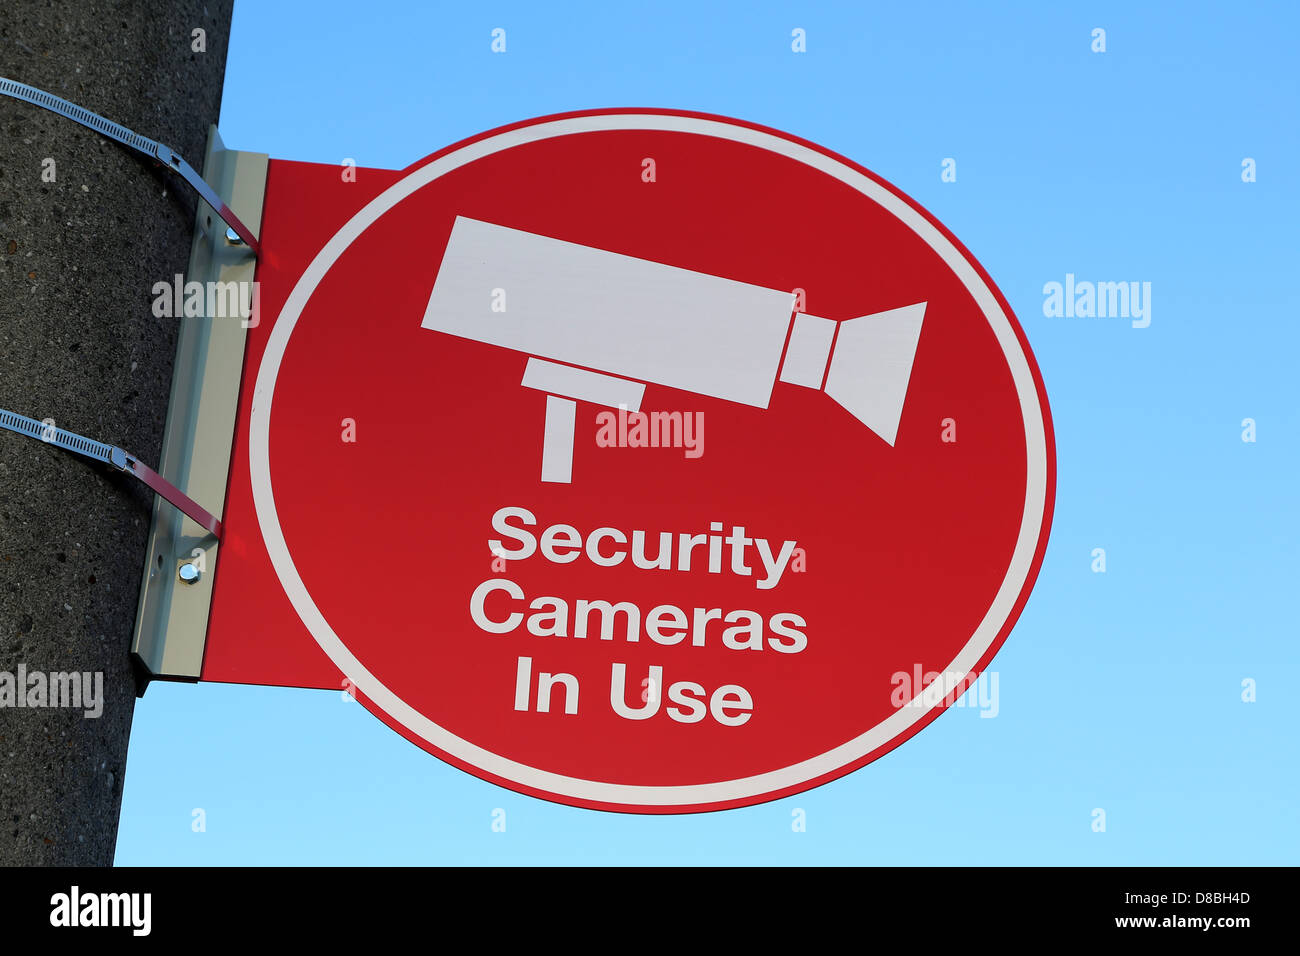 Security cameras in use sign Stock Photo